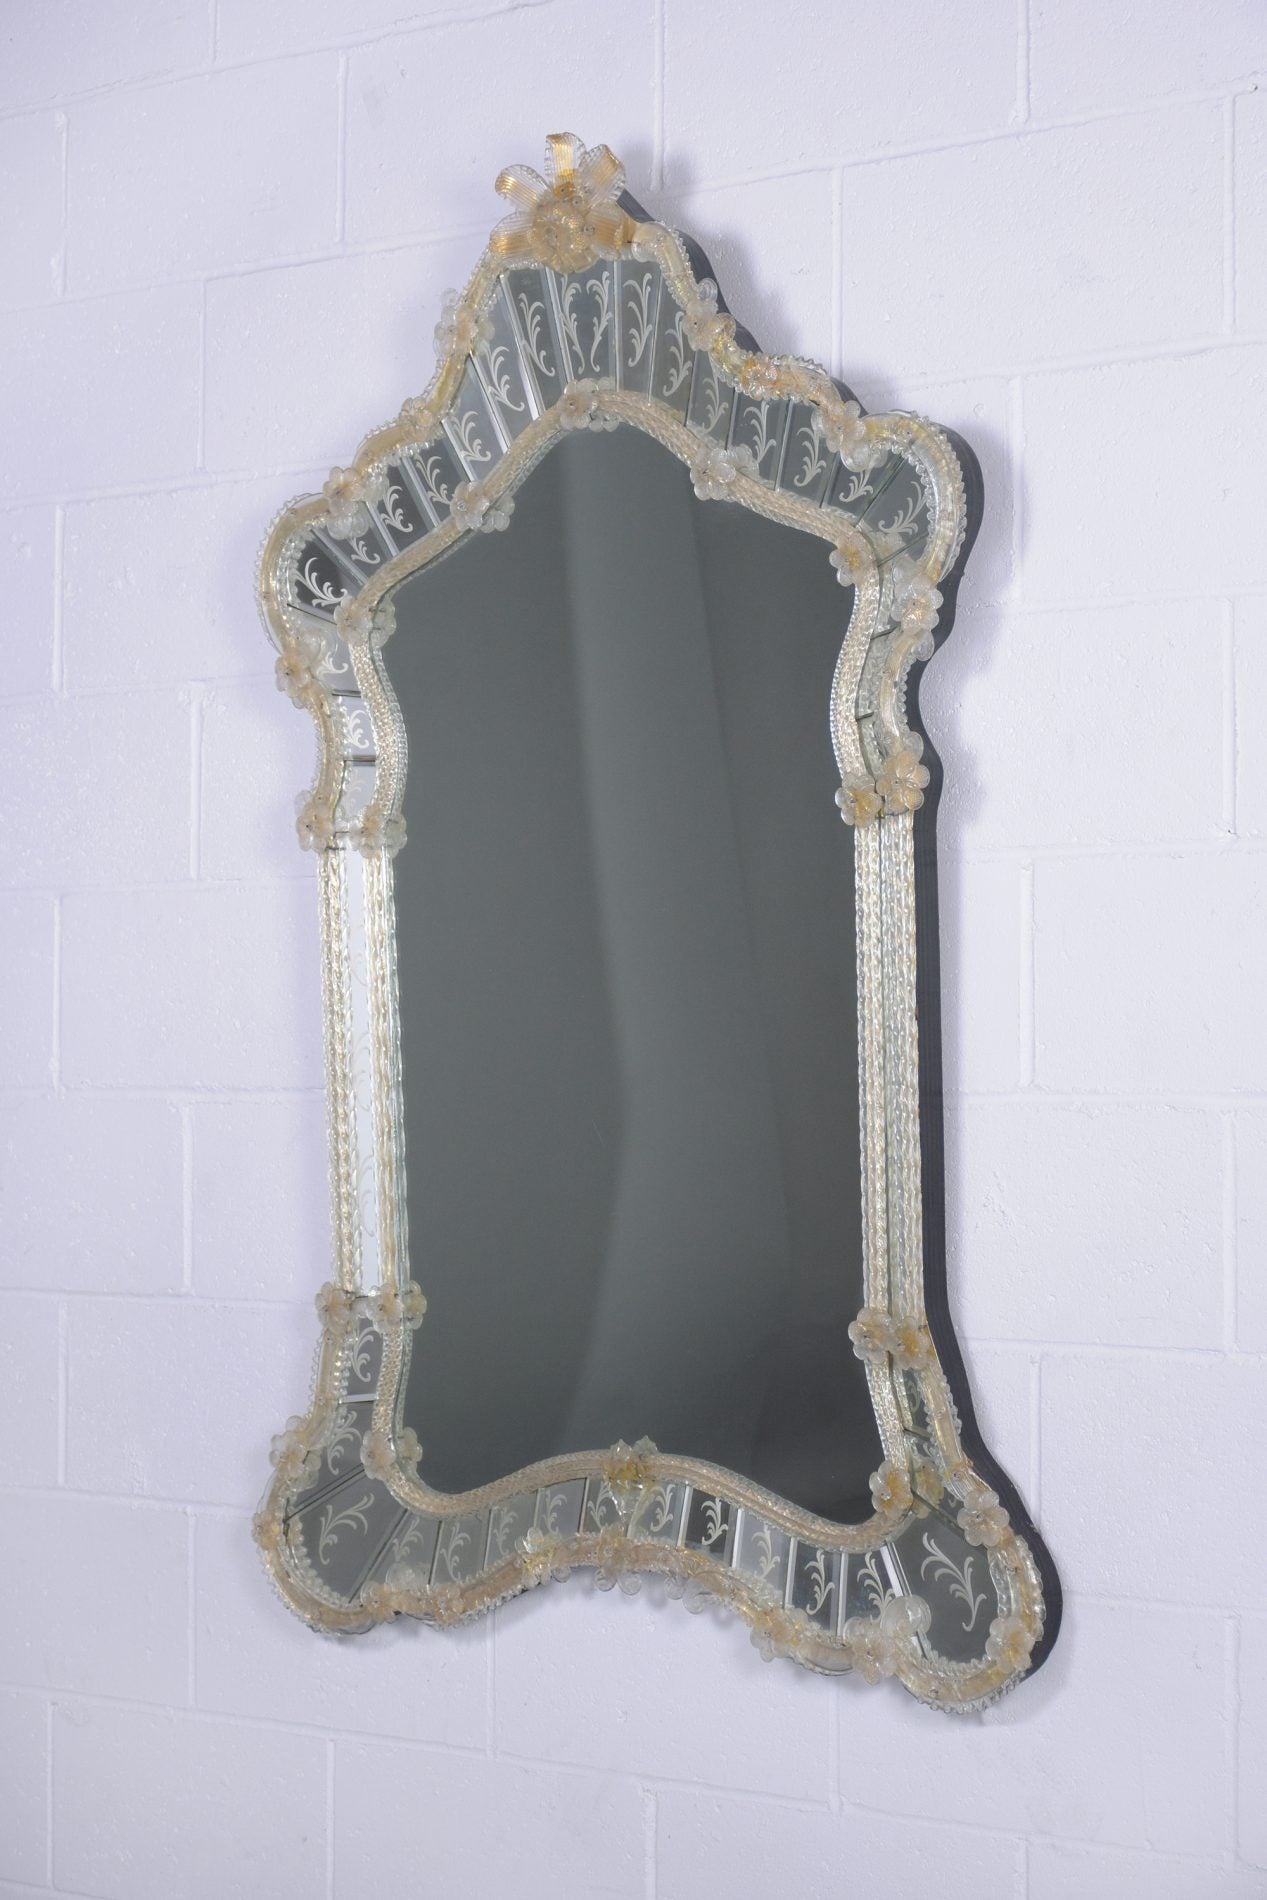 Vintage Italian Hand-Crafted Mirror with Etched Leaf Design & Murano Glass Flower Molding